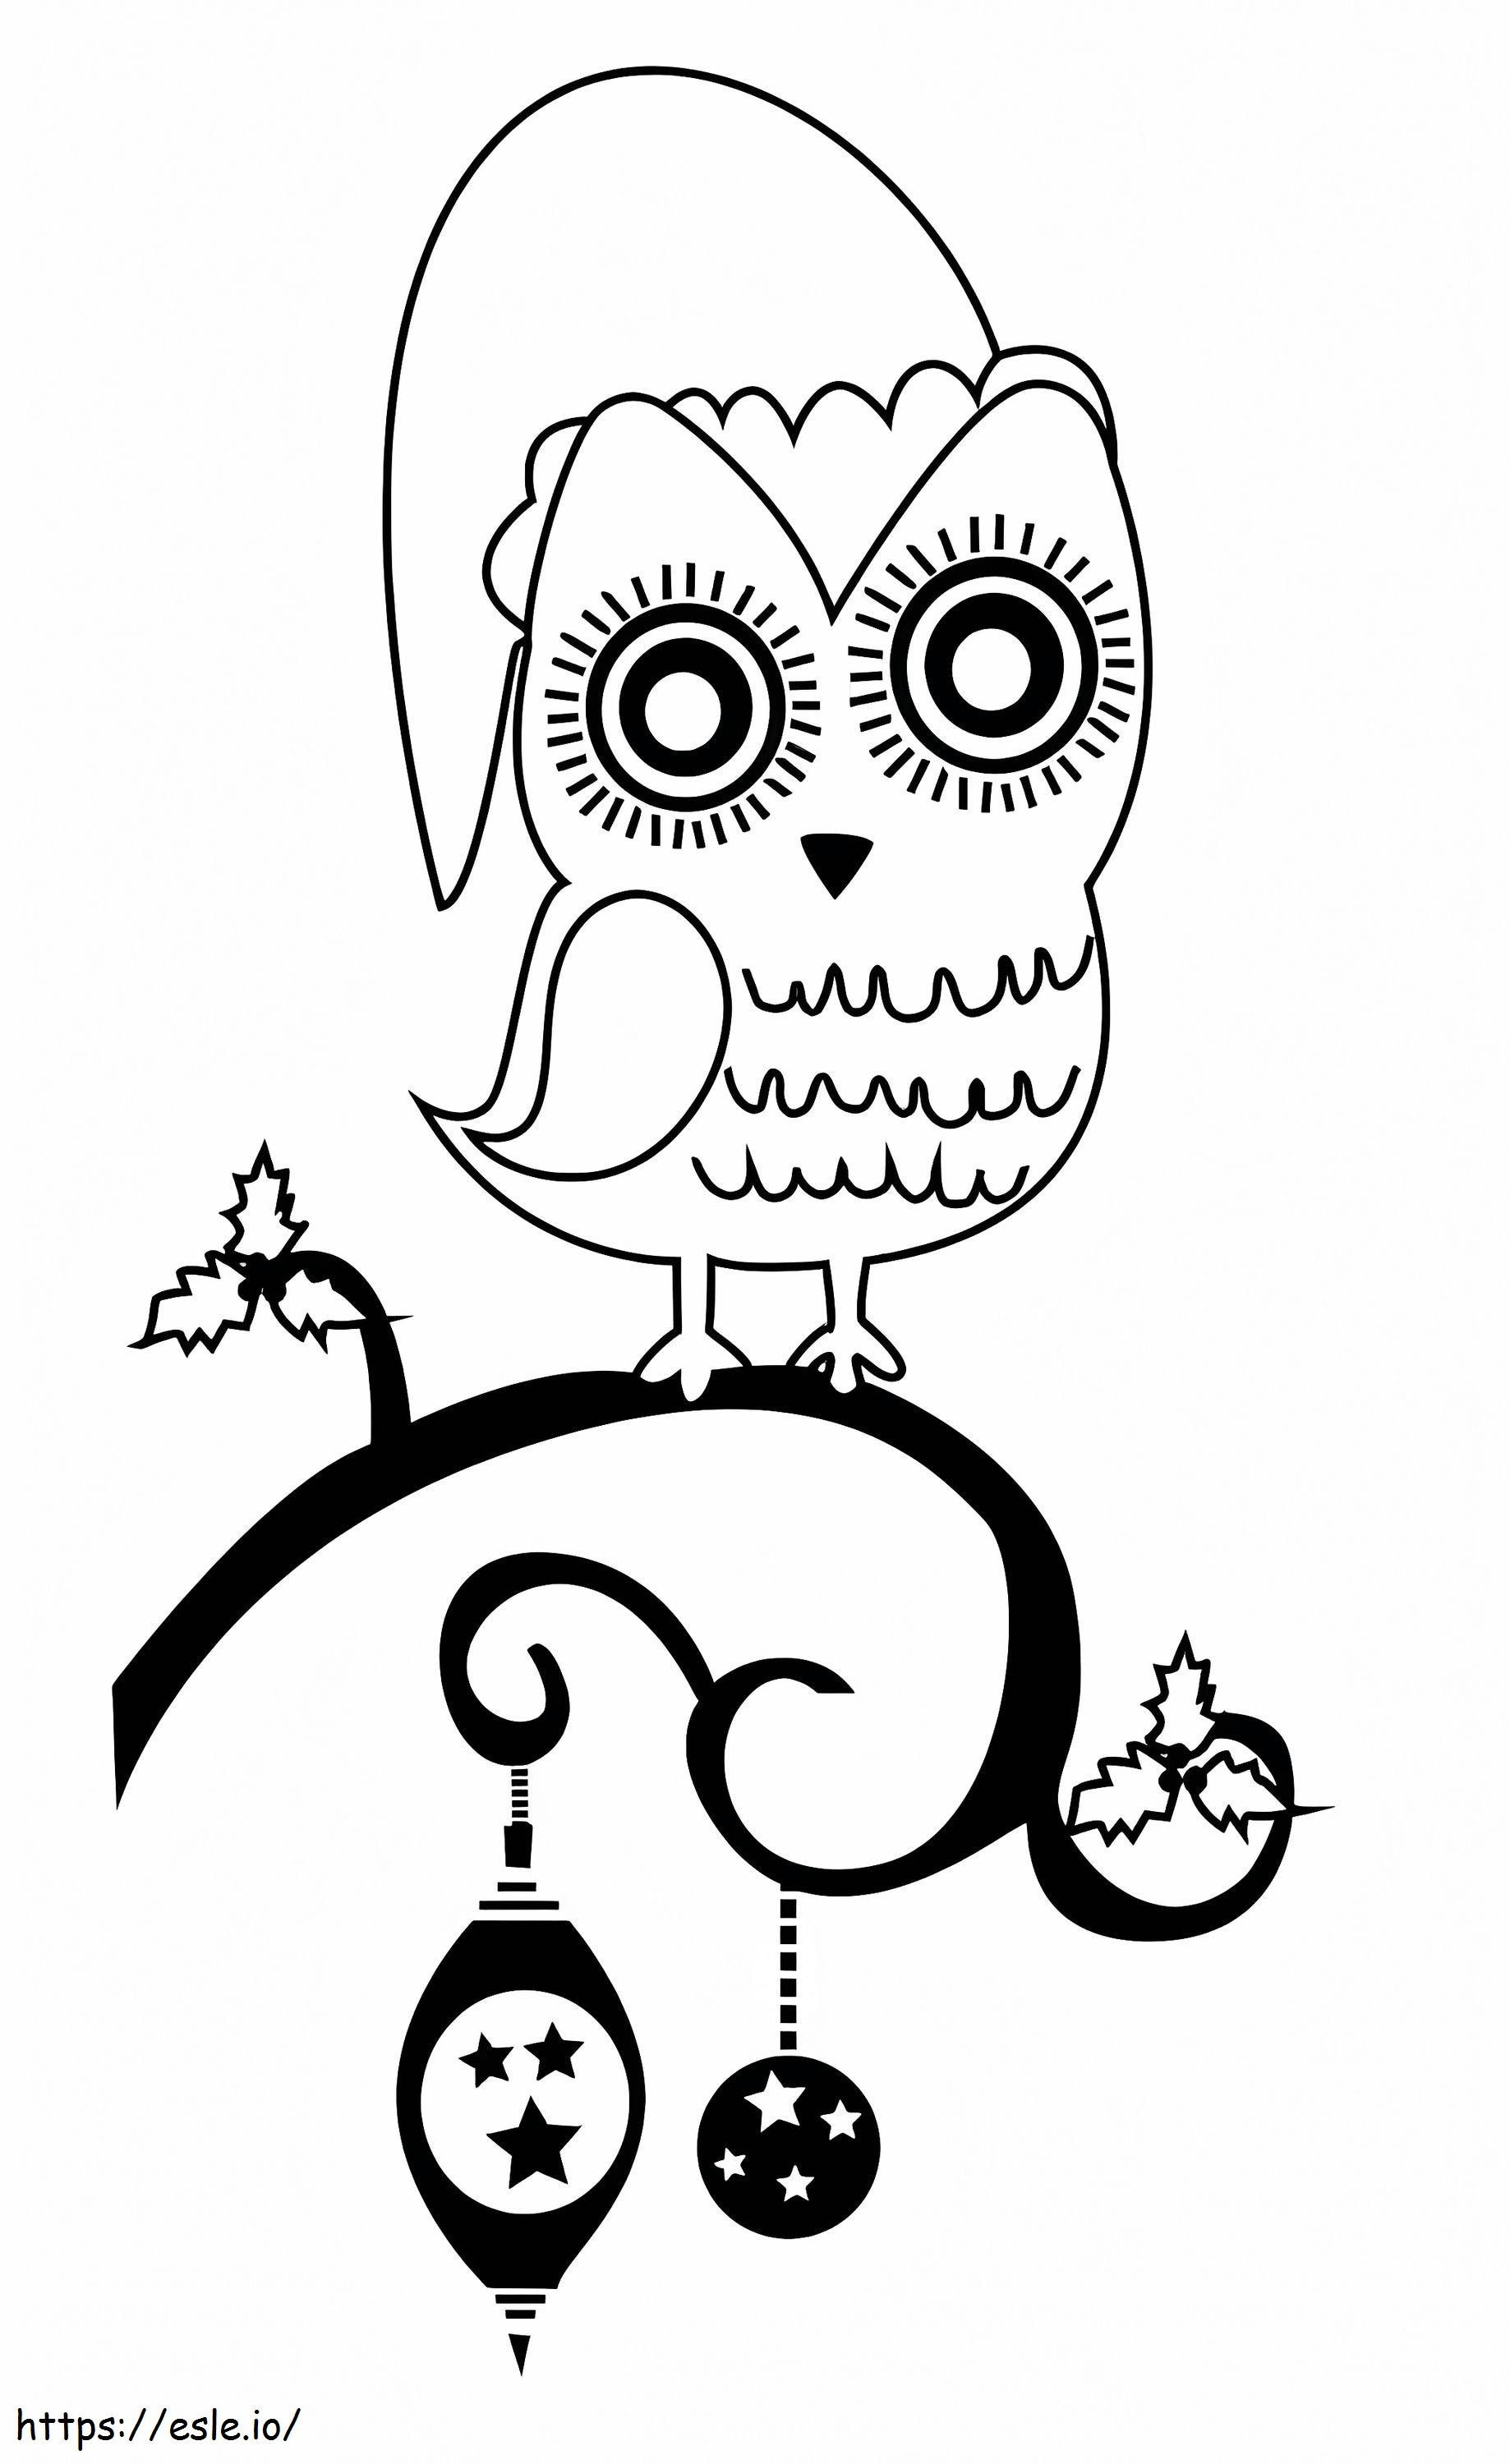 Cute Christmas Owl coloring page